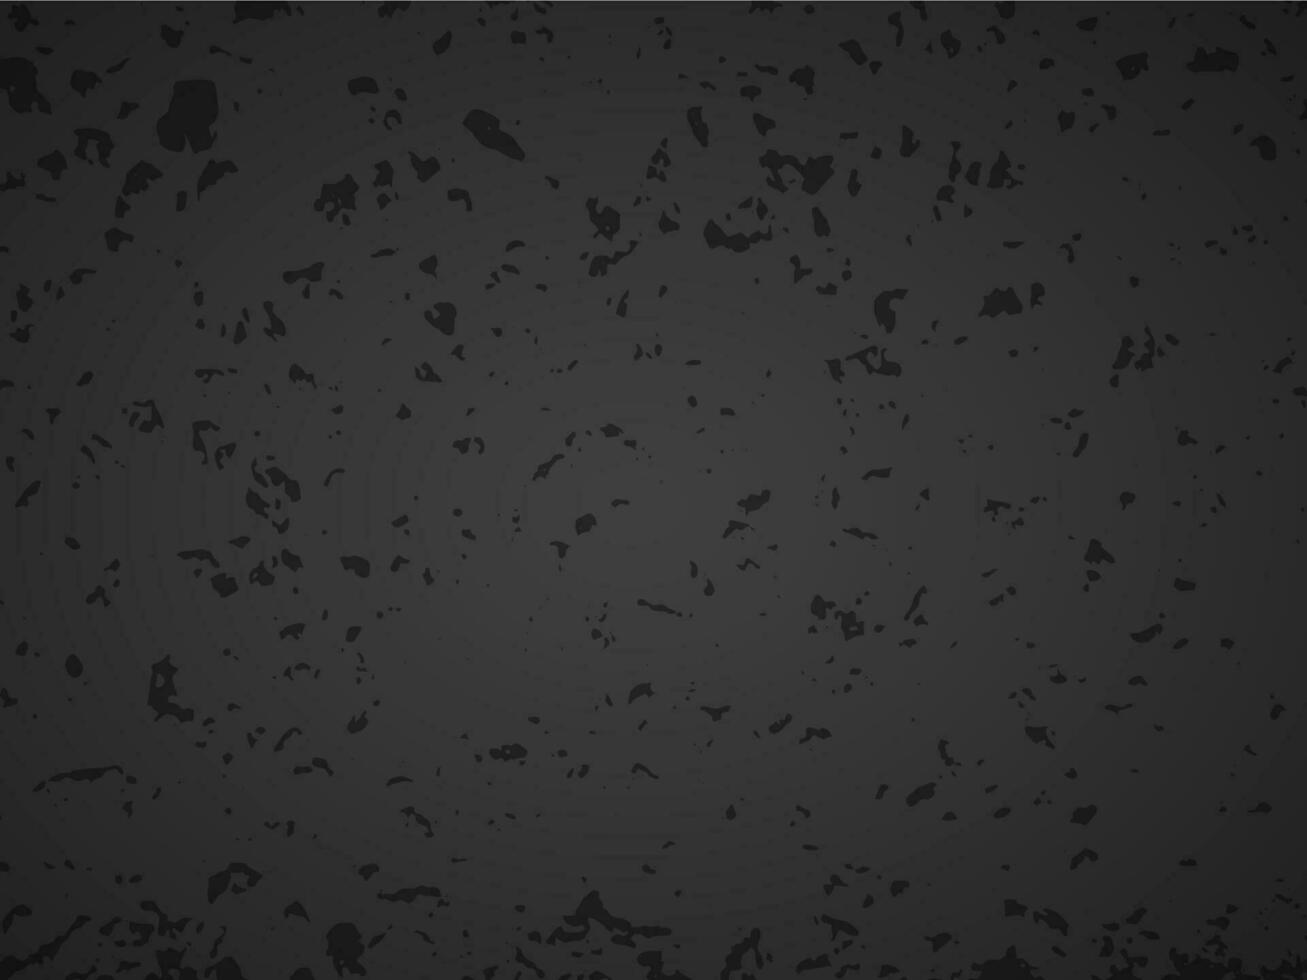 Grunge grainy dirty texture. Dark scratched distress abstract urban overlay background. Vector illustration